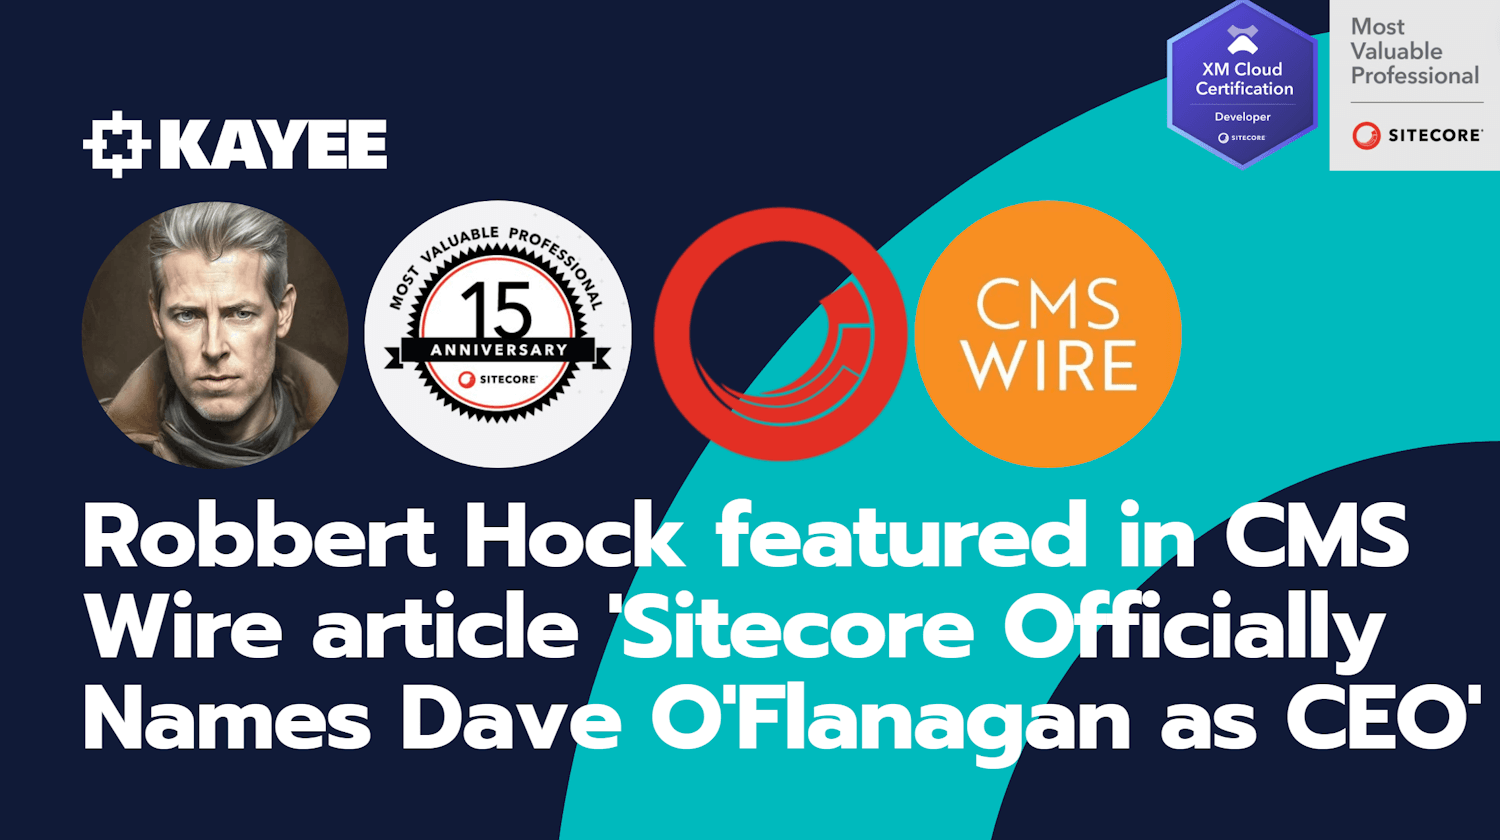 Robbert Hock featured in CMS Wire article 'Sitecore Officially Names Dave O'Flanagan as CEO'